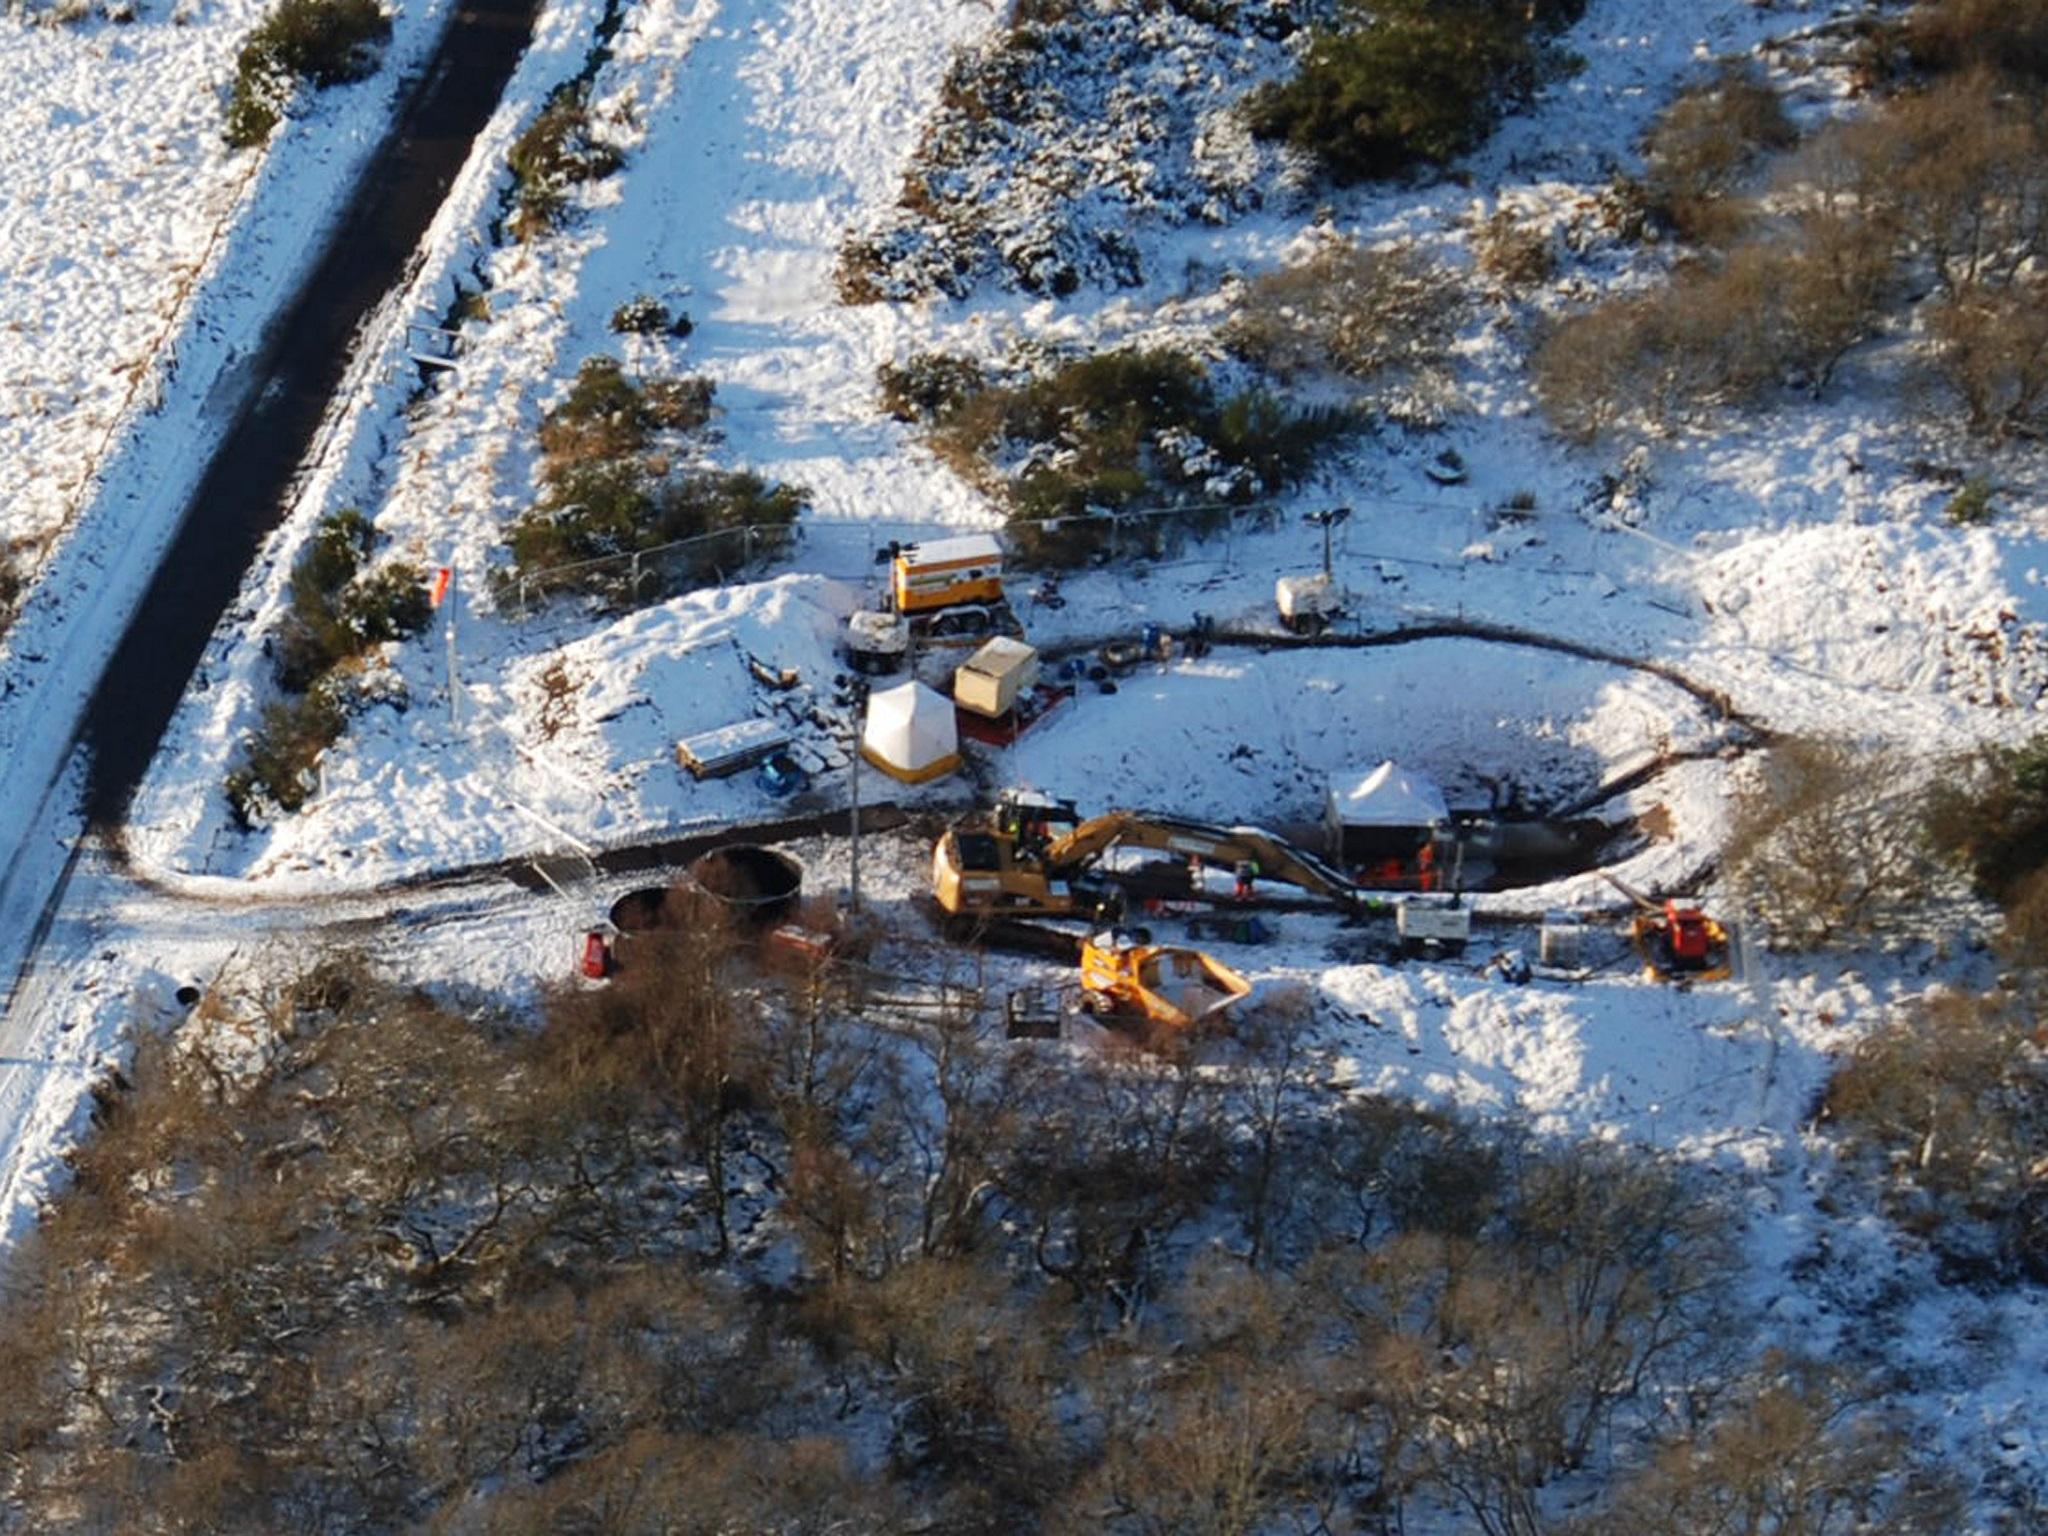 A crack in the “Forties” pipeline was discovered earlier this month during a routine inspection